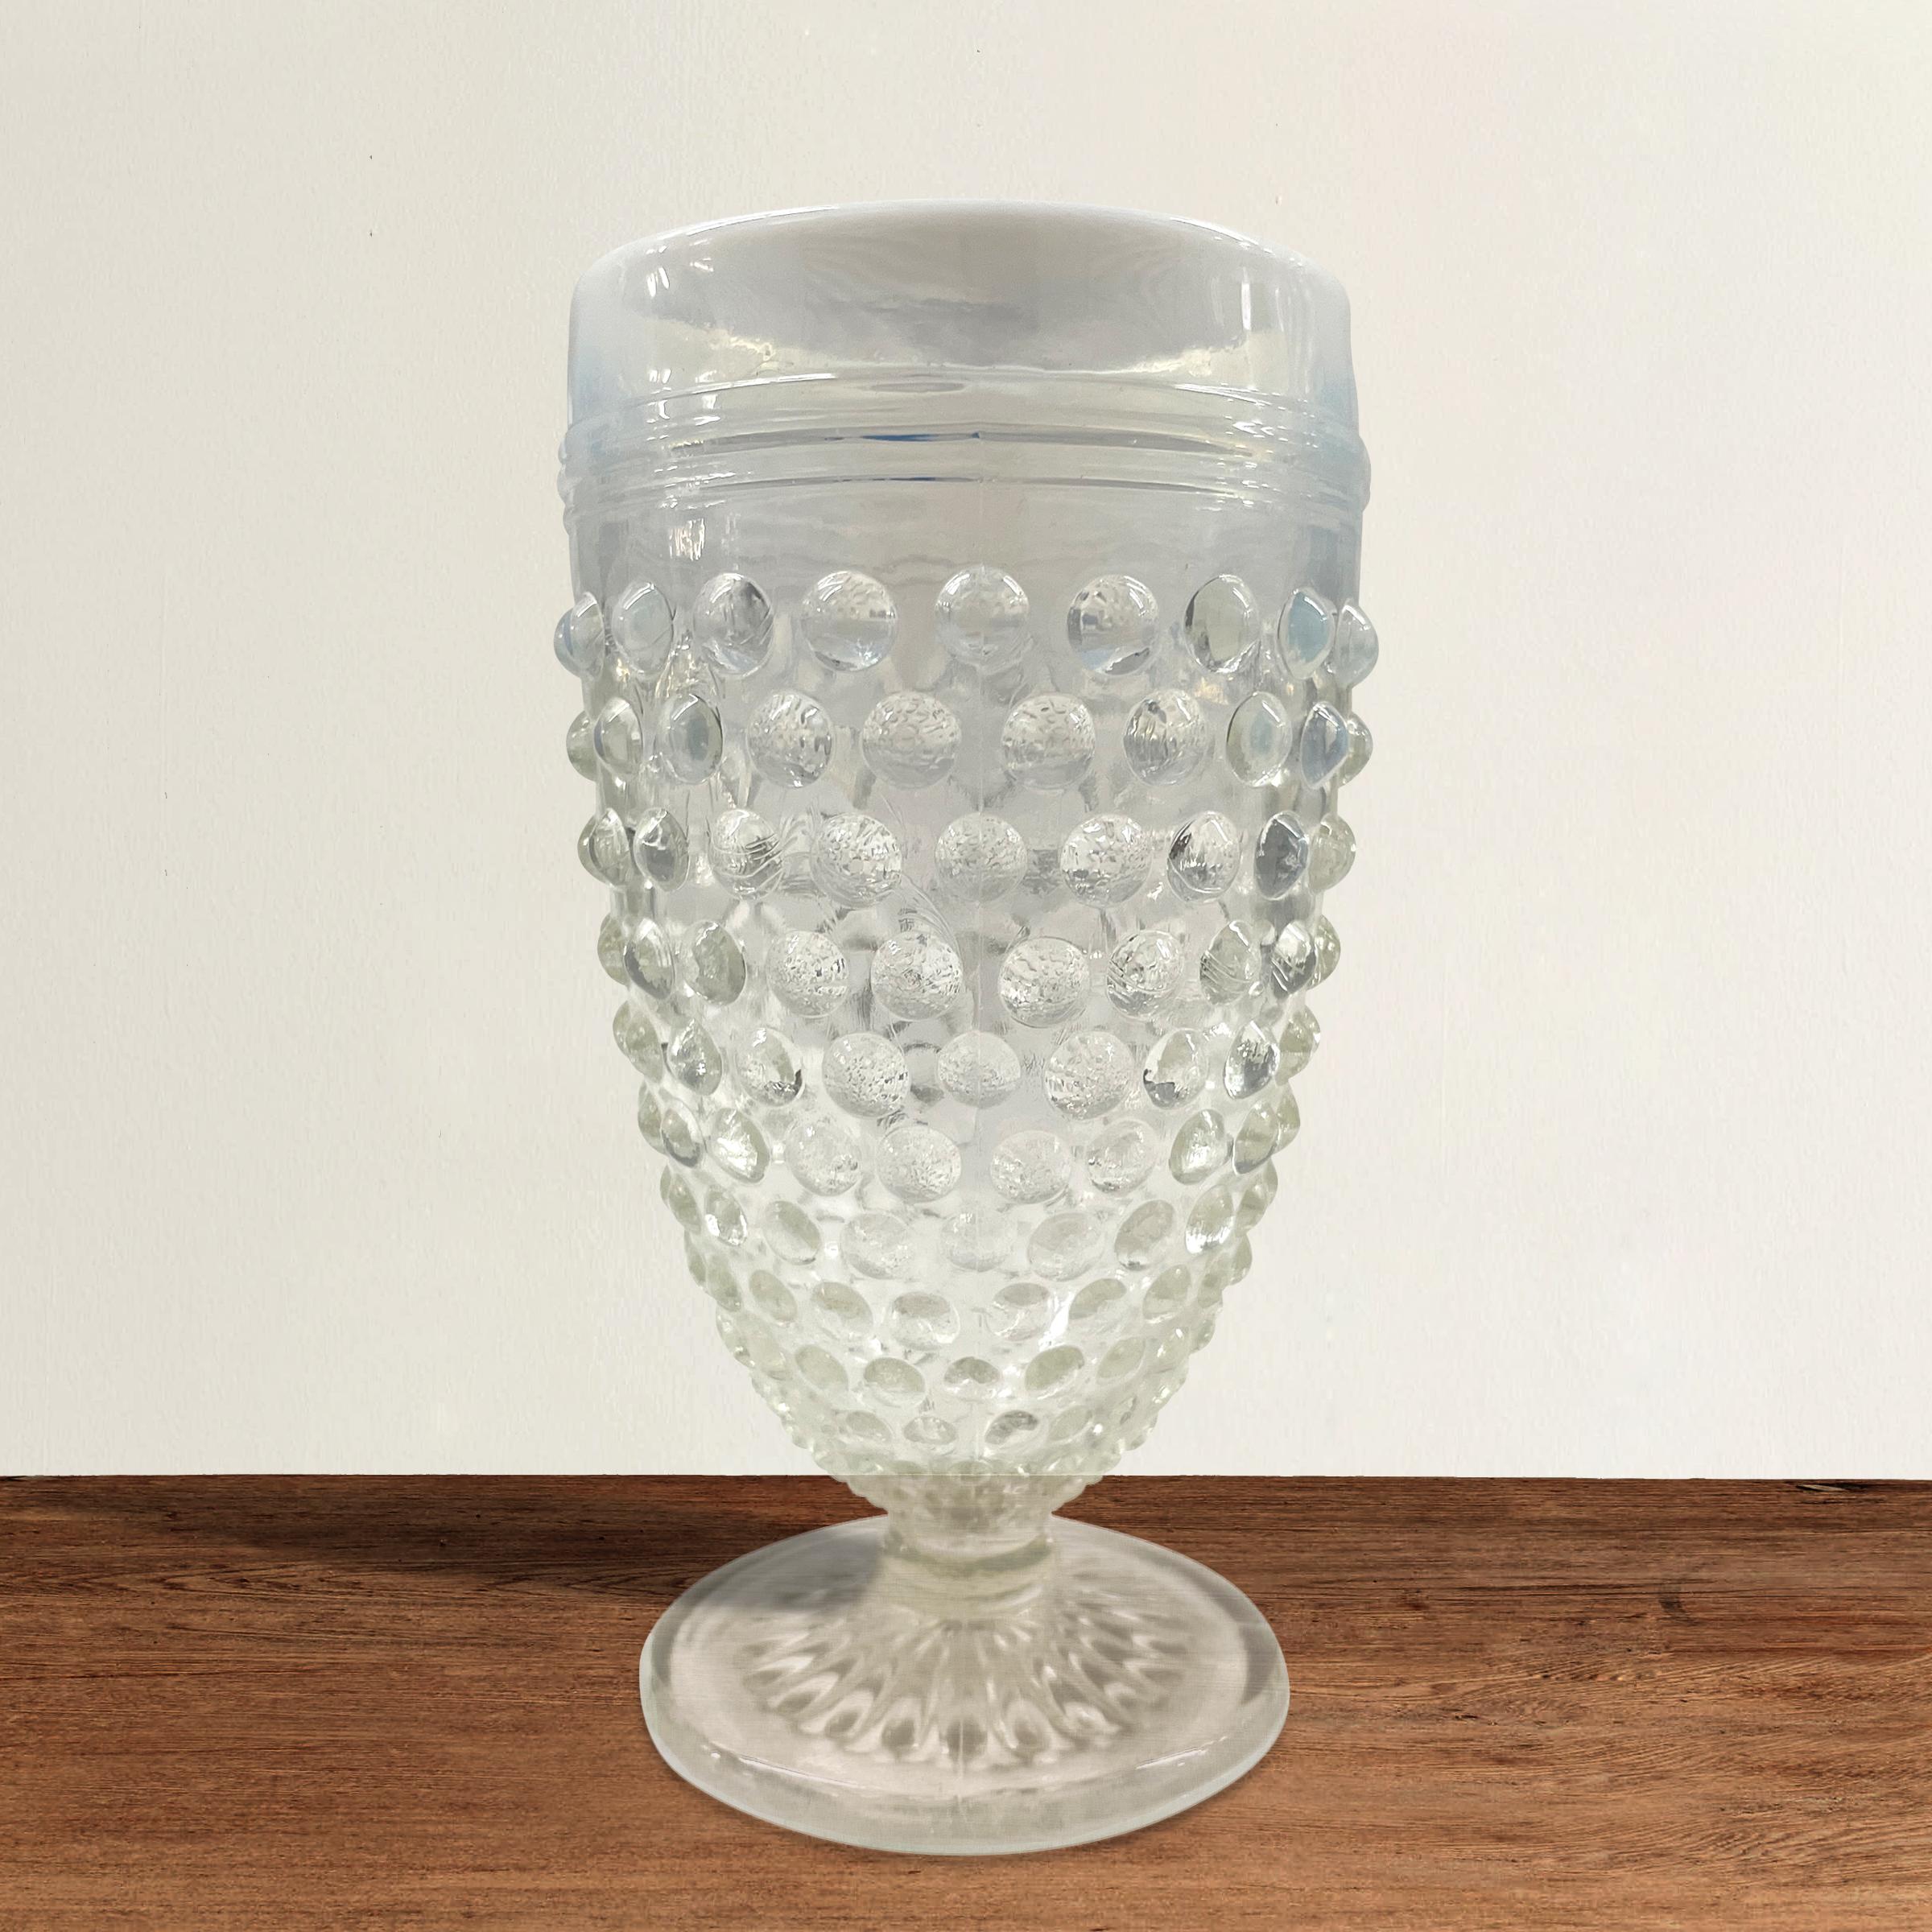 A playful set of six vintage American hobnail juice glasses with opaque white rims fading to a clear glass at the bottom. Perfect for your next garden or brunch party!